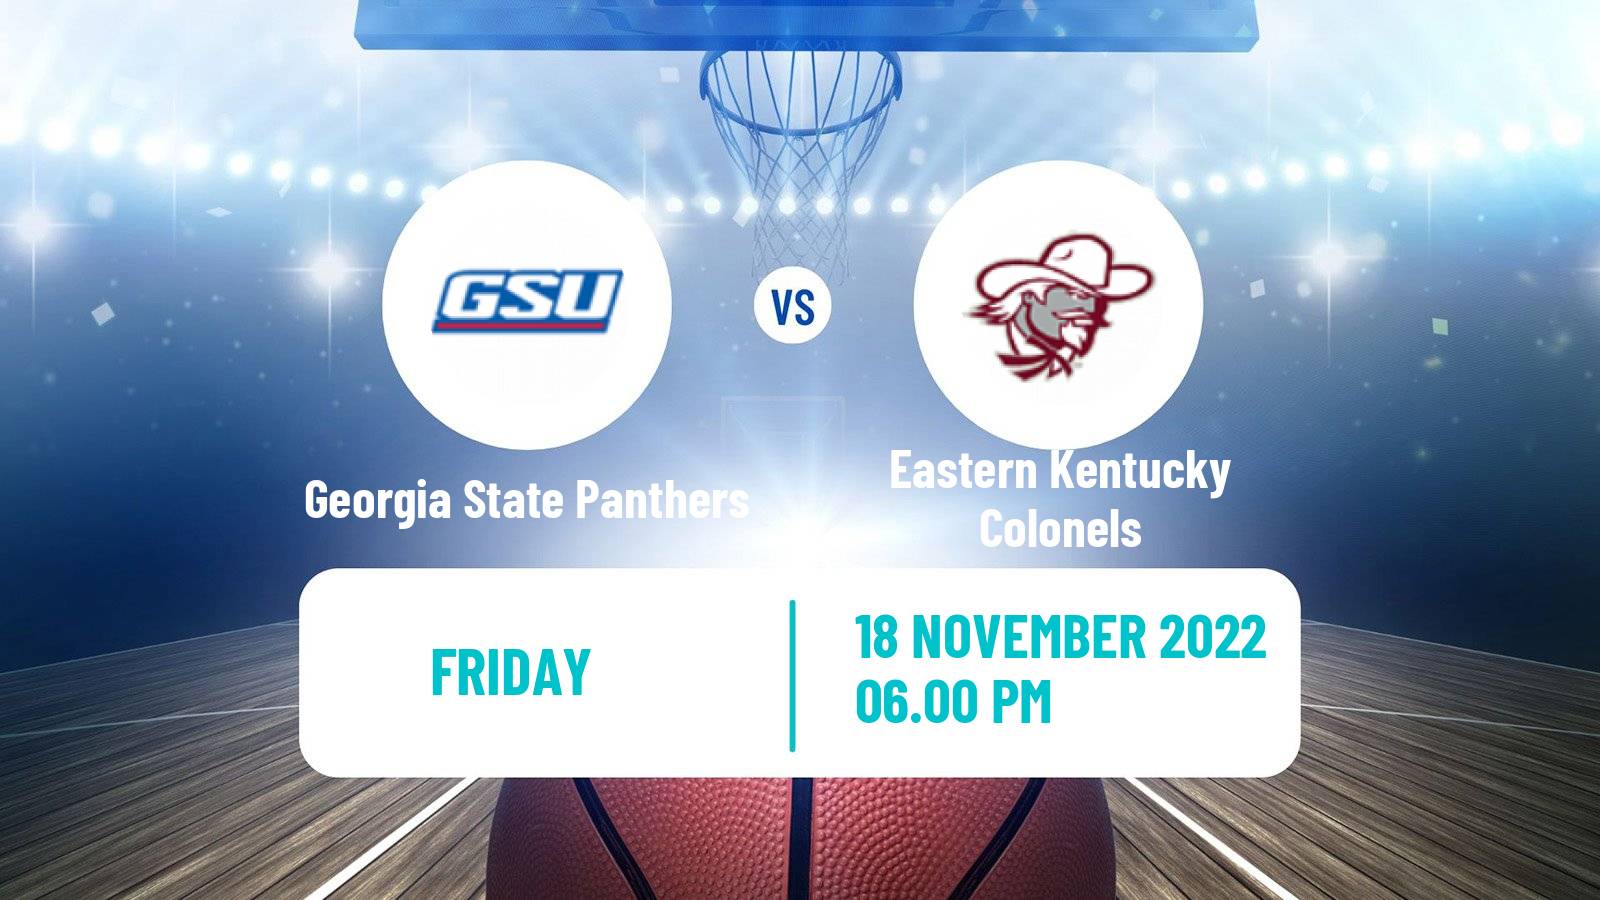 Basketball NCAA College Basketball Georgia State Panthers - Eastern Kentucky Colonels